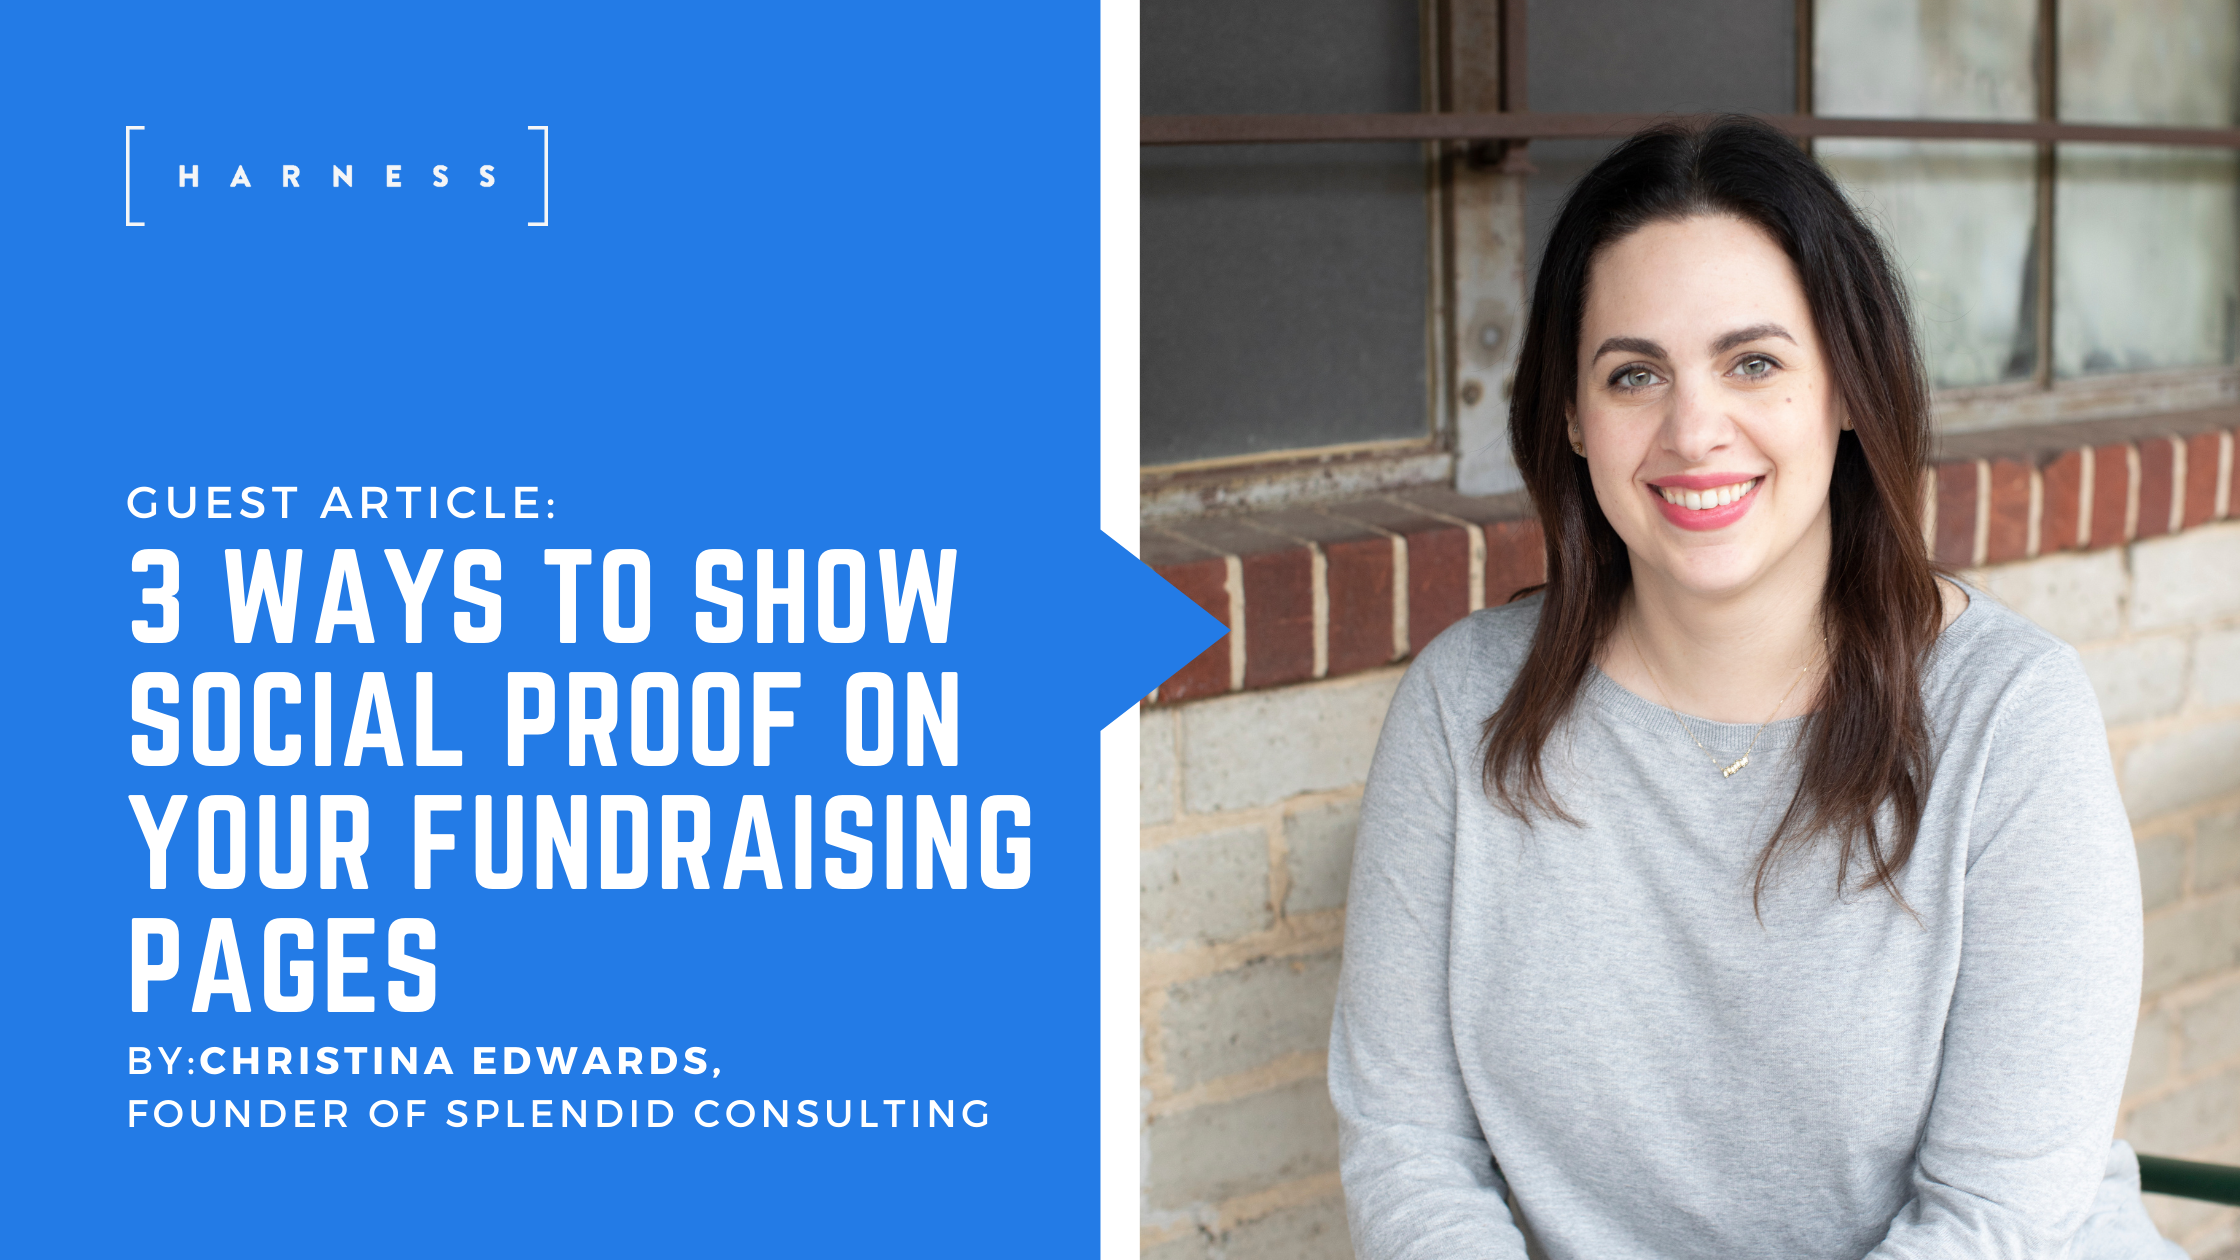 3 Ways To Show Social Proof On Your Fundraising Pages